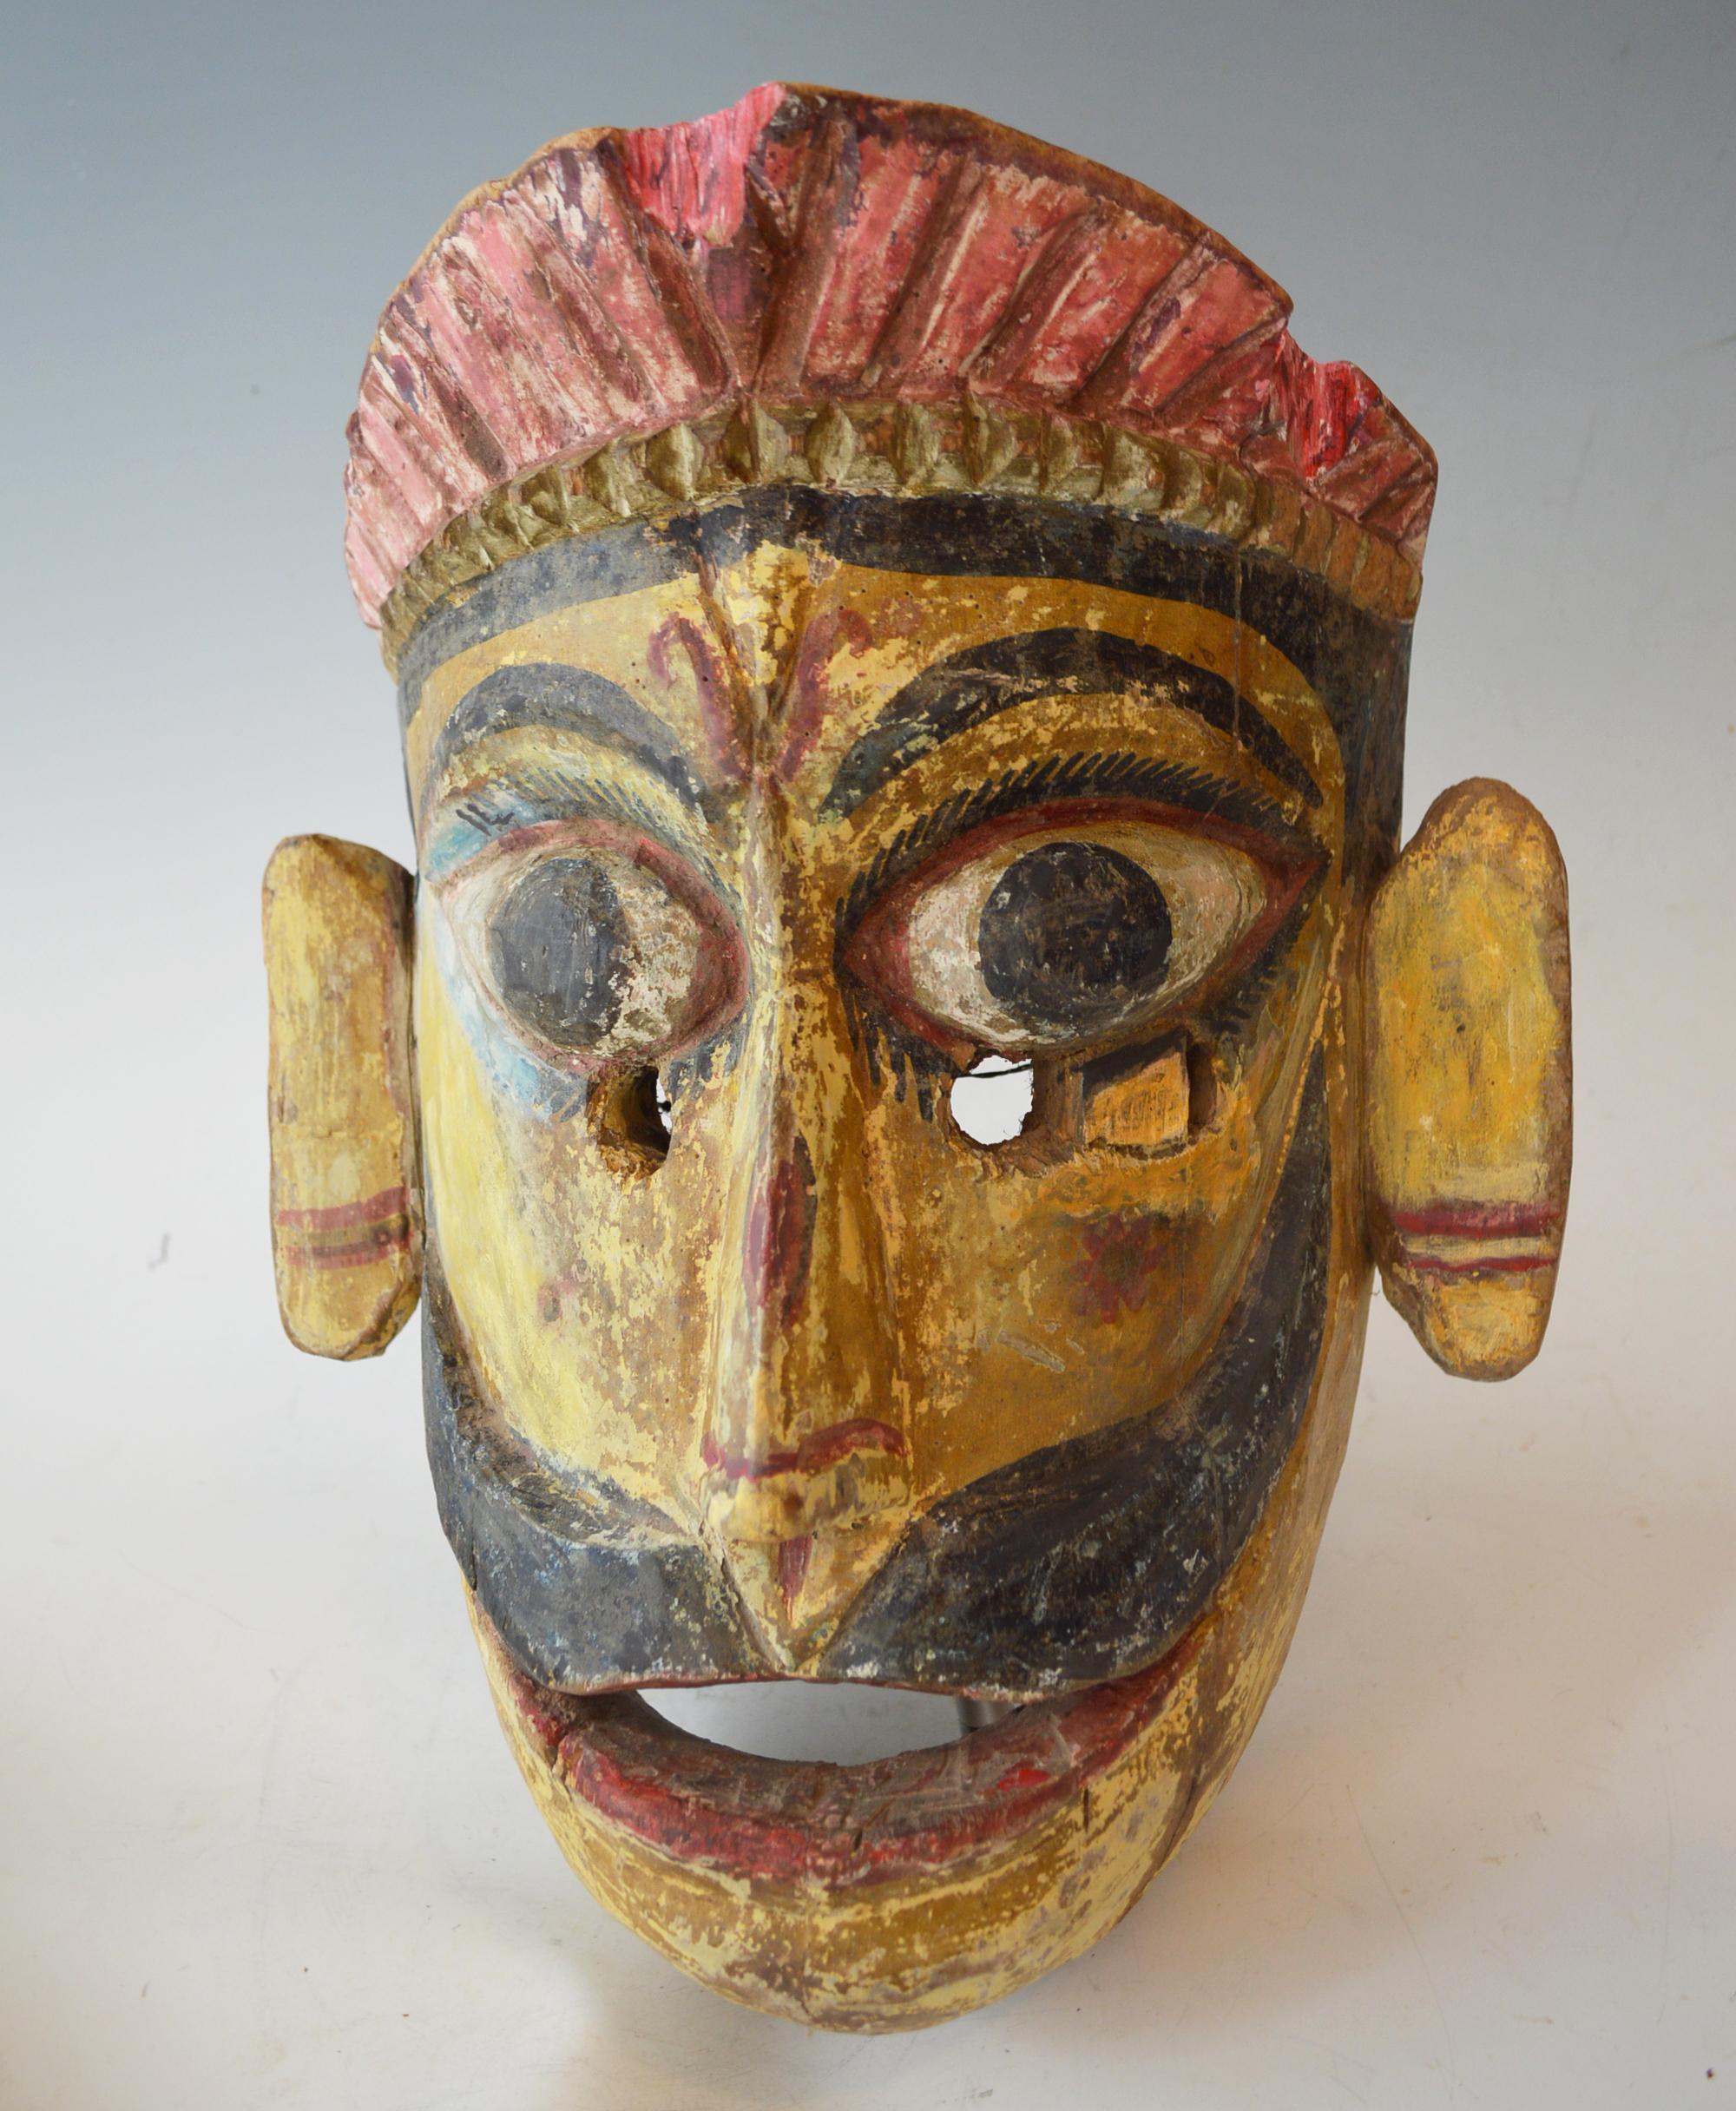 A impressive large old Nepalese ritual festival mask of Indra,
These type of masks are used in the Ramayana theater performances and puja festivals and represent Indra or Shiva
Period early 20th century, from a UK collection.
Hard wood with